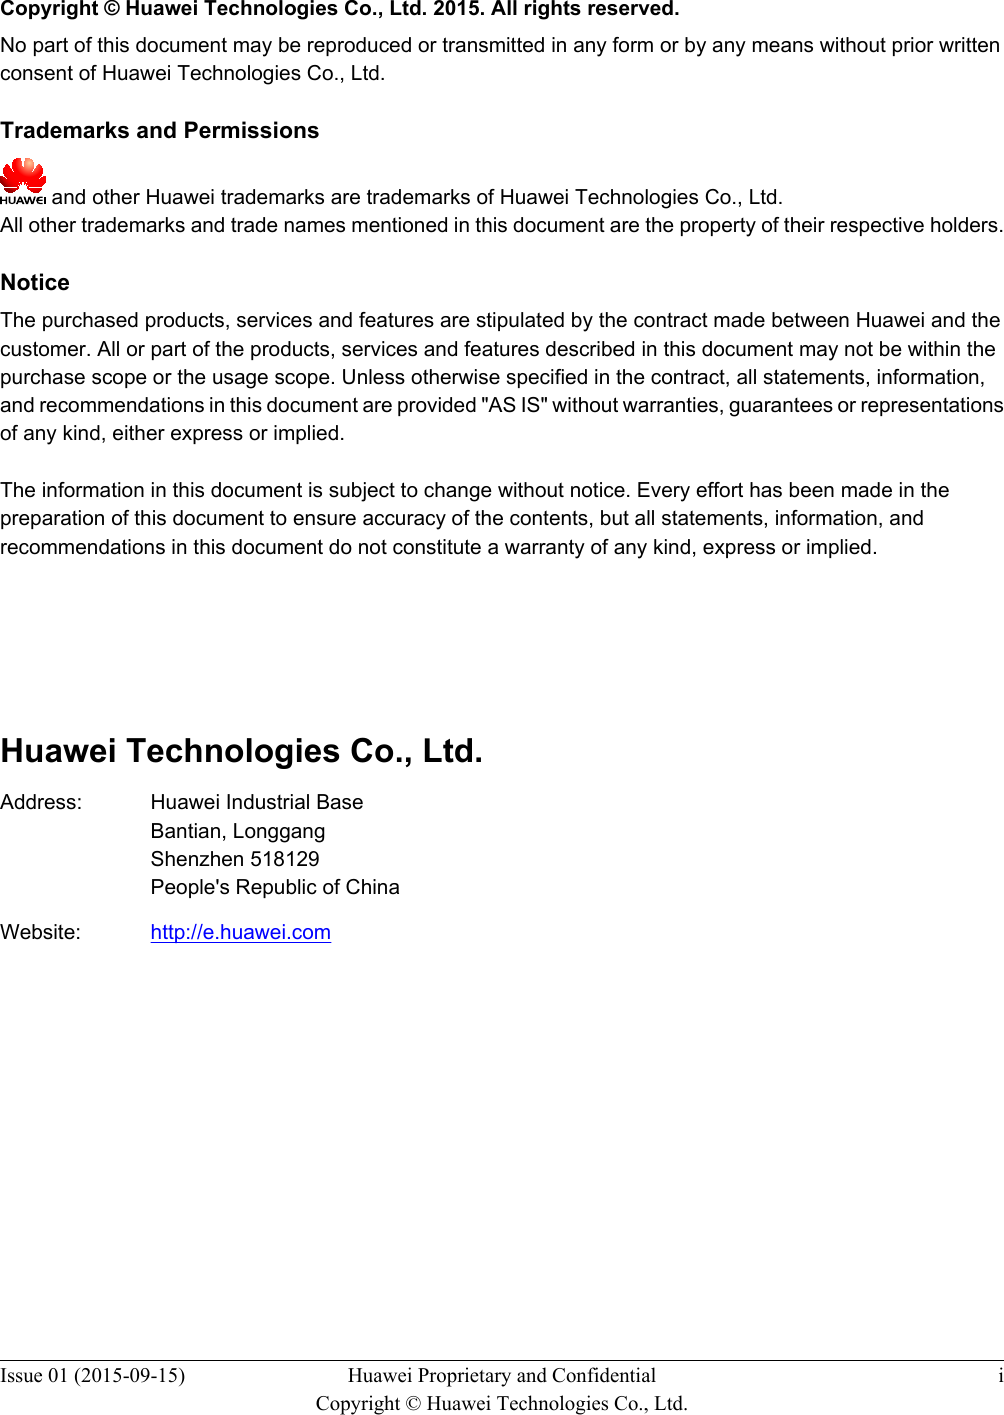   Copyright © Huawei Technologies Co., Ltd. 2015. All rights reserved.No part of this document may be reproduced or transmitted in any form or by any means without prior writtenconsent of Huawei Technologies Co., Ltd. Trademarks and Permissions and other Huawei trademarks are trademarks of Huawei Technologies Co., Ltd.All other trademarks and trade names mentioned in this document are the property of their respective holders. NoticeThe purchased products, services and features are stipulated by the contract made between Huawei and thecustomer. All or part of the products, services and features described in this document may not be within thepurchase scope or the usage scope. Unless otherwise specified in the contract, all statements, information,and recommendations in this document are provided &quot;AS IS&quot; without warranties, guarantees or representationsof any kind, either express or implied.The information in this document is subject to change without notice. Every effort has been made in thepreparation of this document to ensure accuracy of the contents, but all statements, information, andrecommendations in this document do not constitute a warranty of any kind, express or implied.        Huawei Technologies Co., Ltd.Address: Huawei Industrial BaseBantian, LonggangShenzhen 518129People&apos;s Republic of ChinaWebsite: http://e.huawei.comIssue 01 (2015-09-15) Huawei Proprietary and ConfidentialCopyright © Huawei Technologies Co., Ltd.i